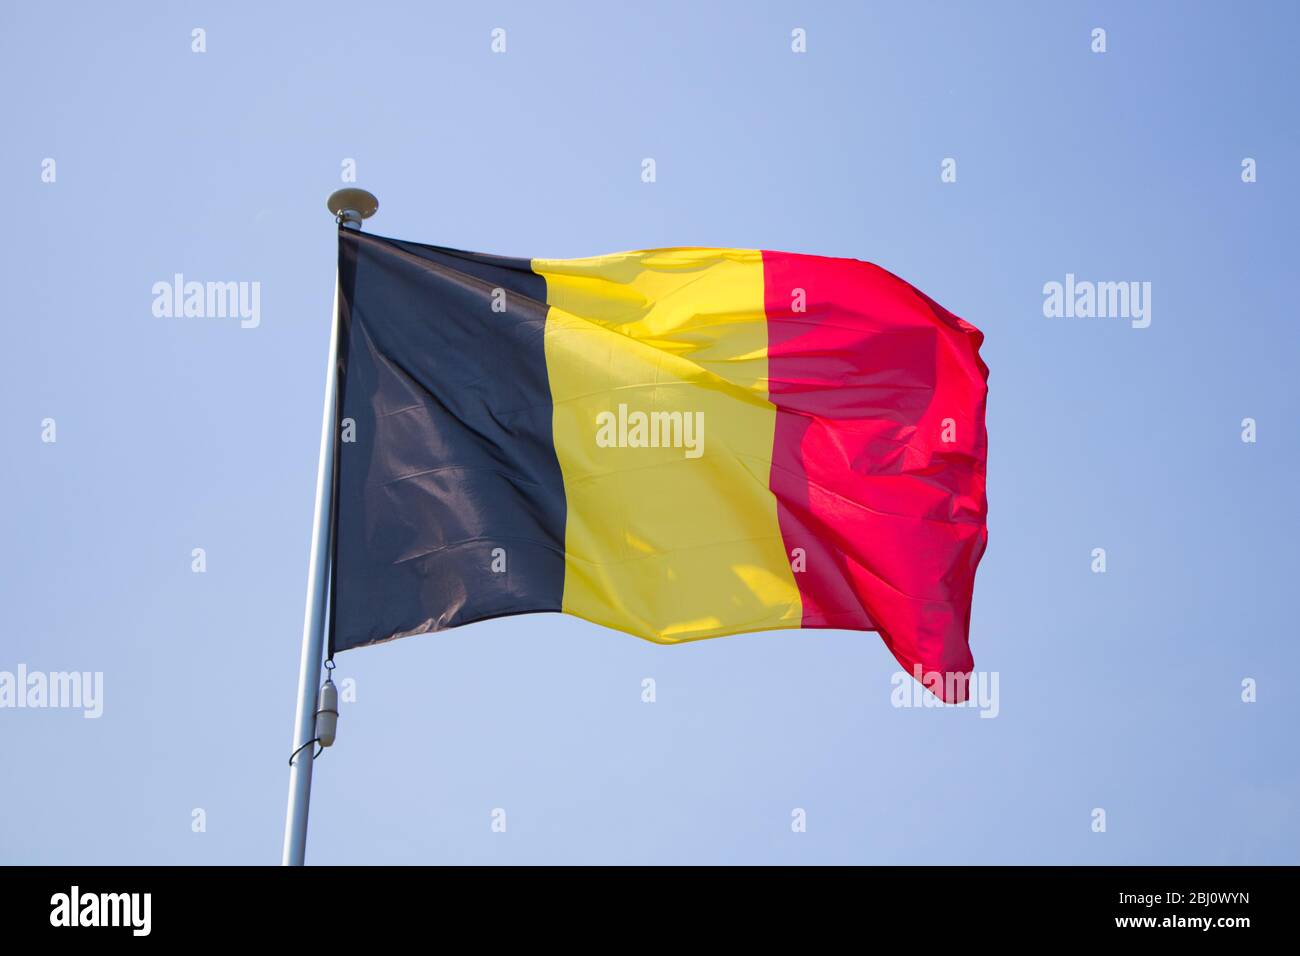 The flag of belgium waving on the wind behind a blue background Stock Photo